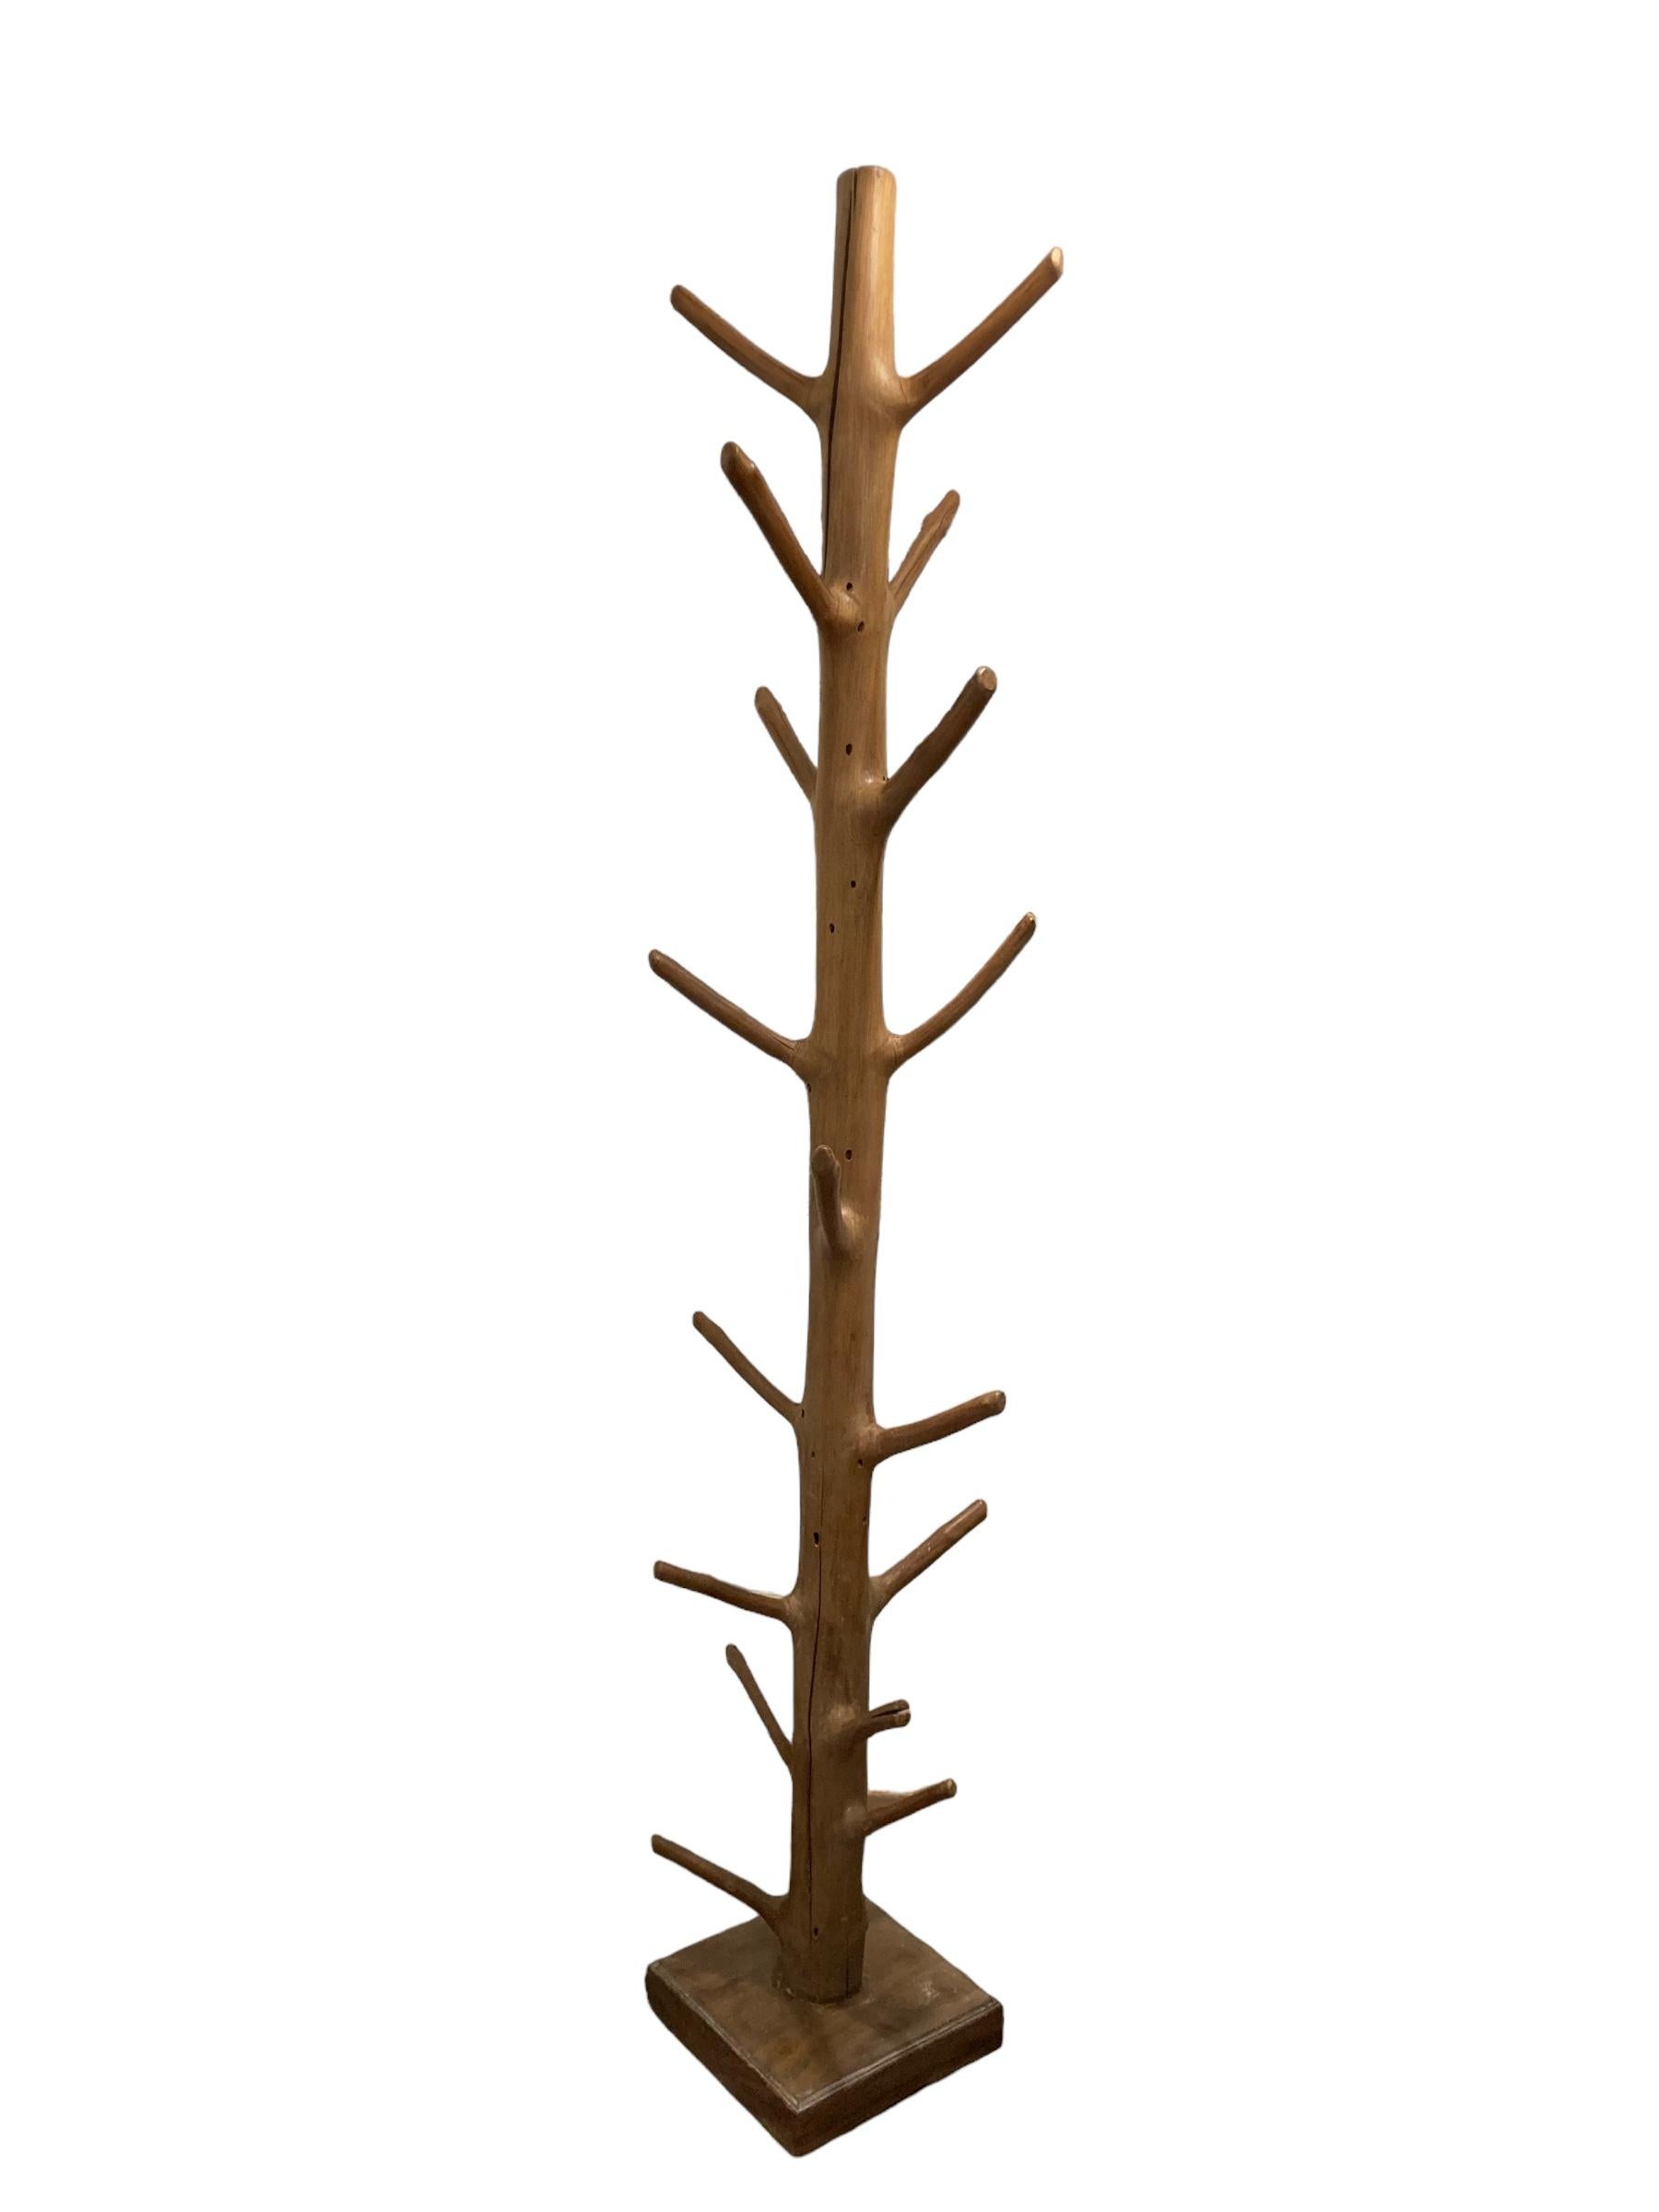 Versatile hard wood coat rack with 19 branches, the perfect addition to any entryway or hallway. Crafted from high-quality wood, this coat rack offers a stylish and functional solution for organizing your coats, hats, scarves, and more. With its